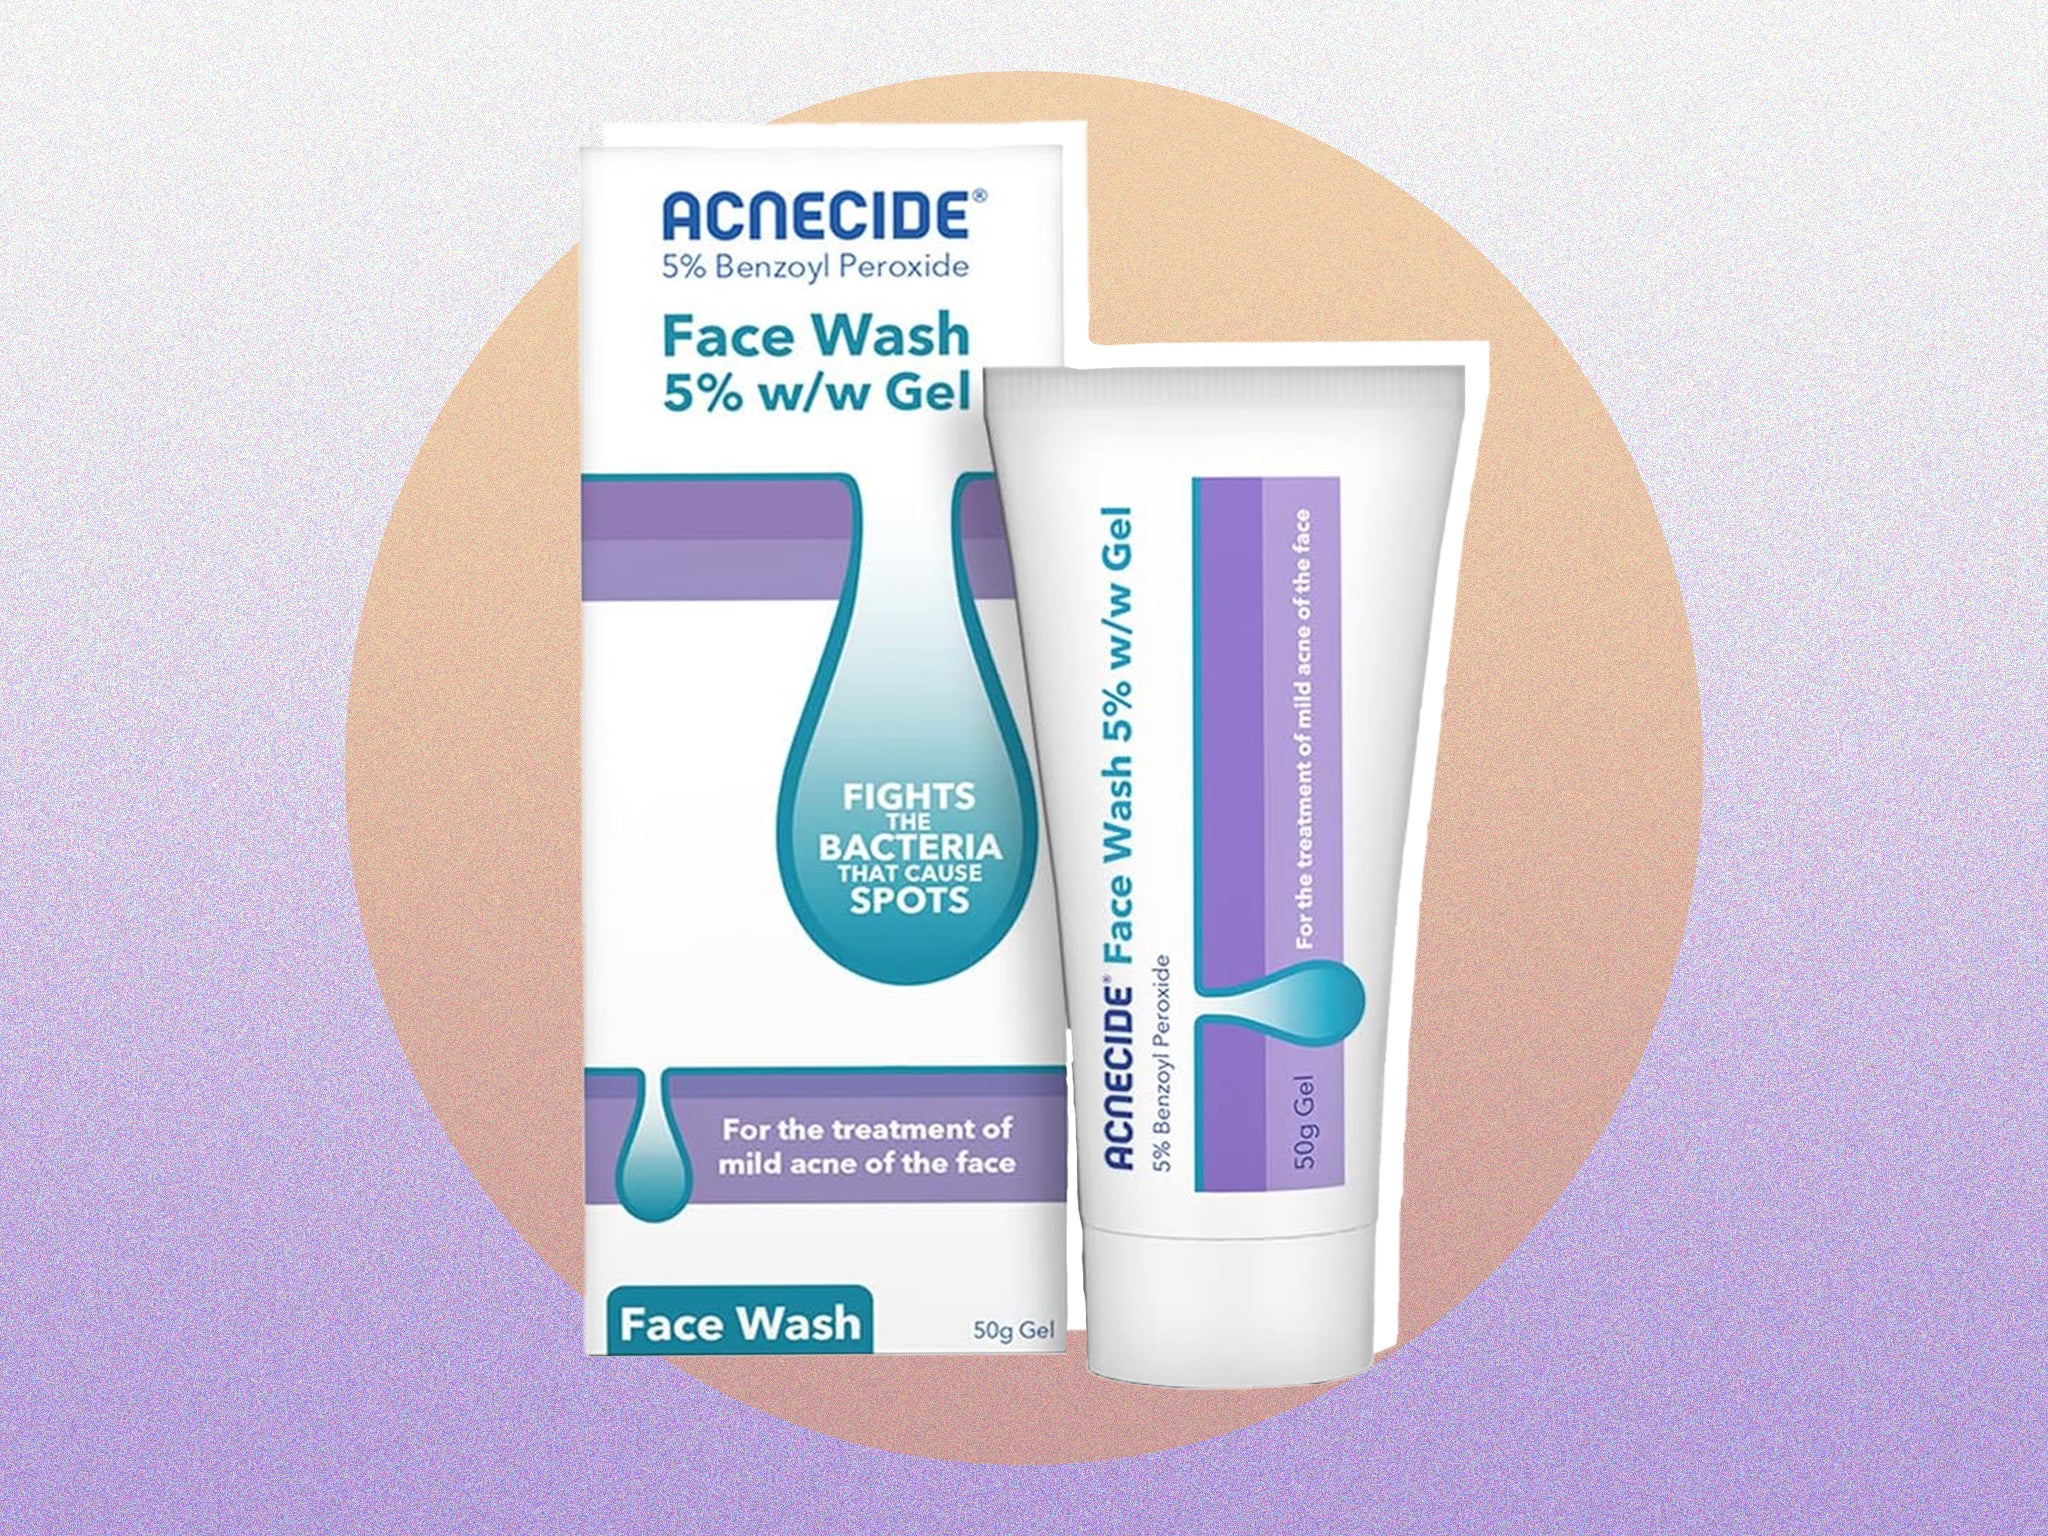 Acnecide face wash gel: Best benzoyl peroxide formula for acne | The ...